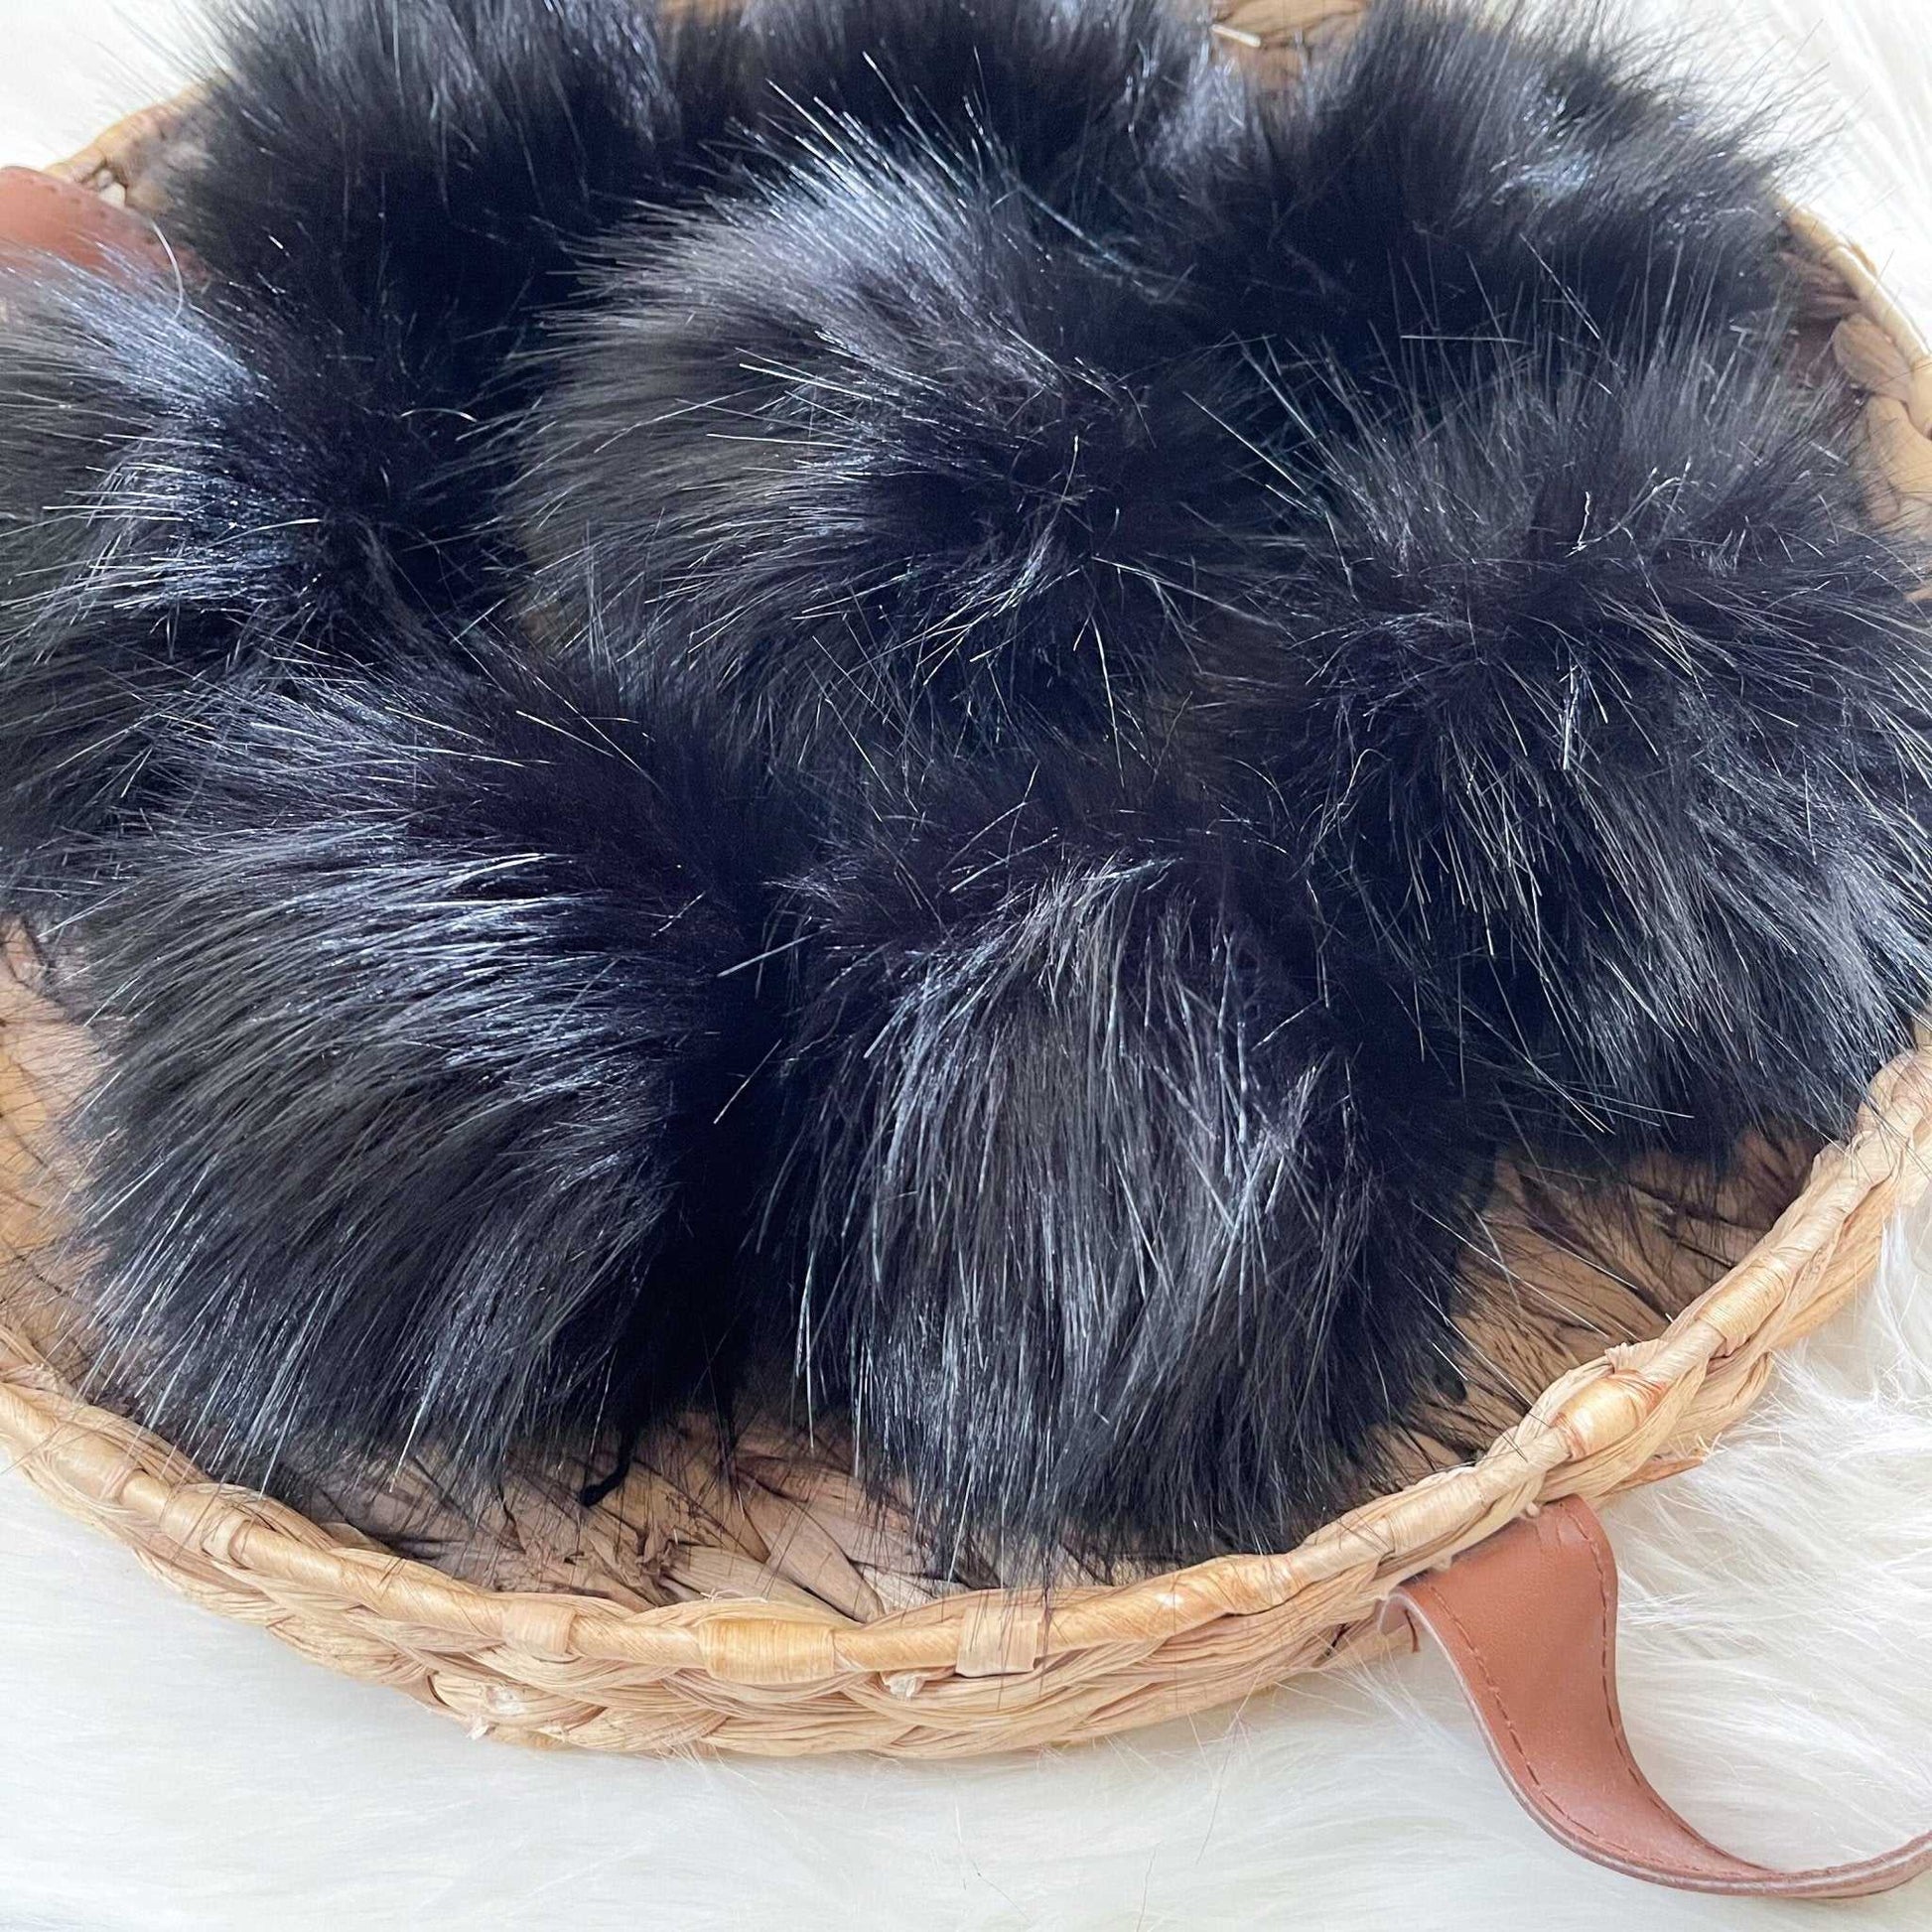 Panther Black Faux Fur Fabric by the Yard or Meter | Pompom Fur, arts and crafts, Costume, Upholstery, stuffy Faux Fur Fabric 3 $ Buttons & Beans Co.